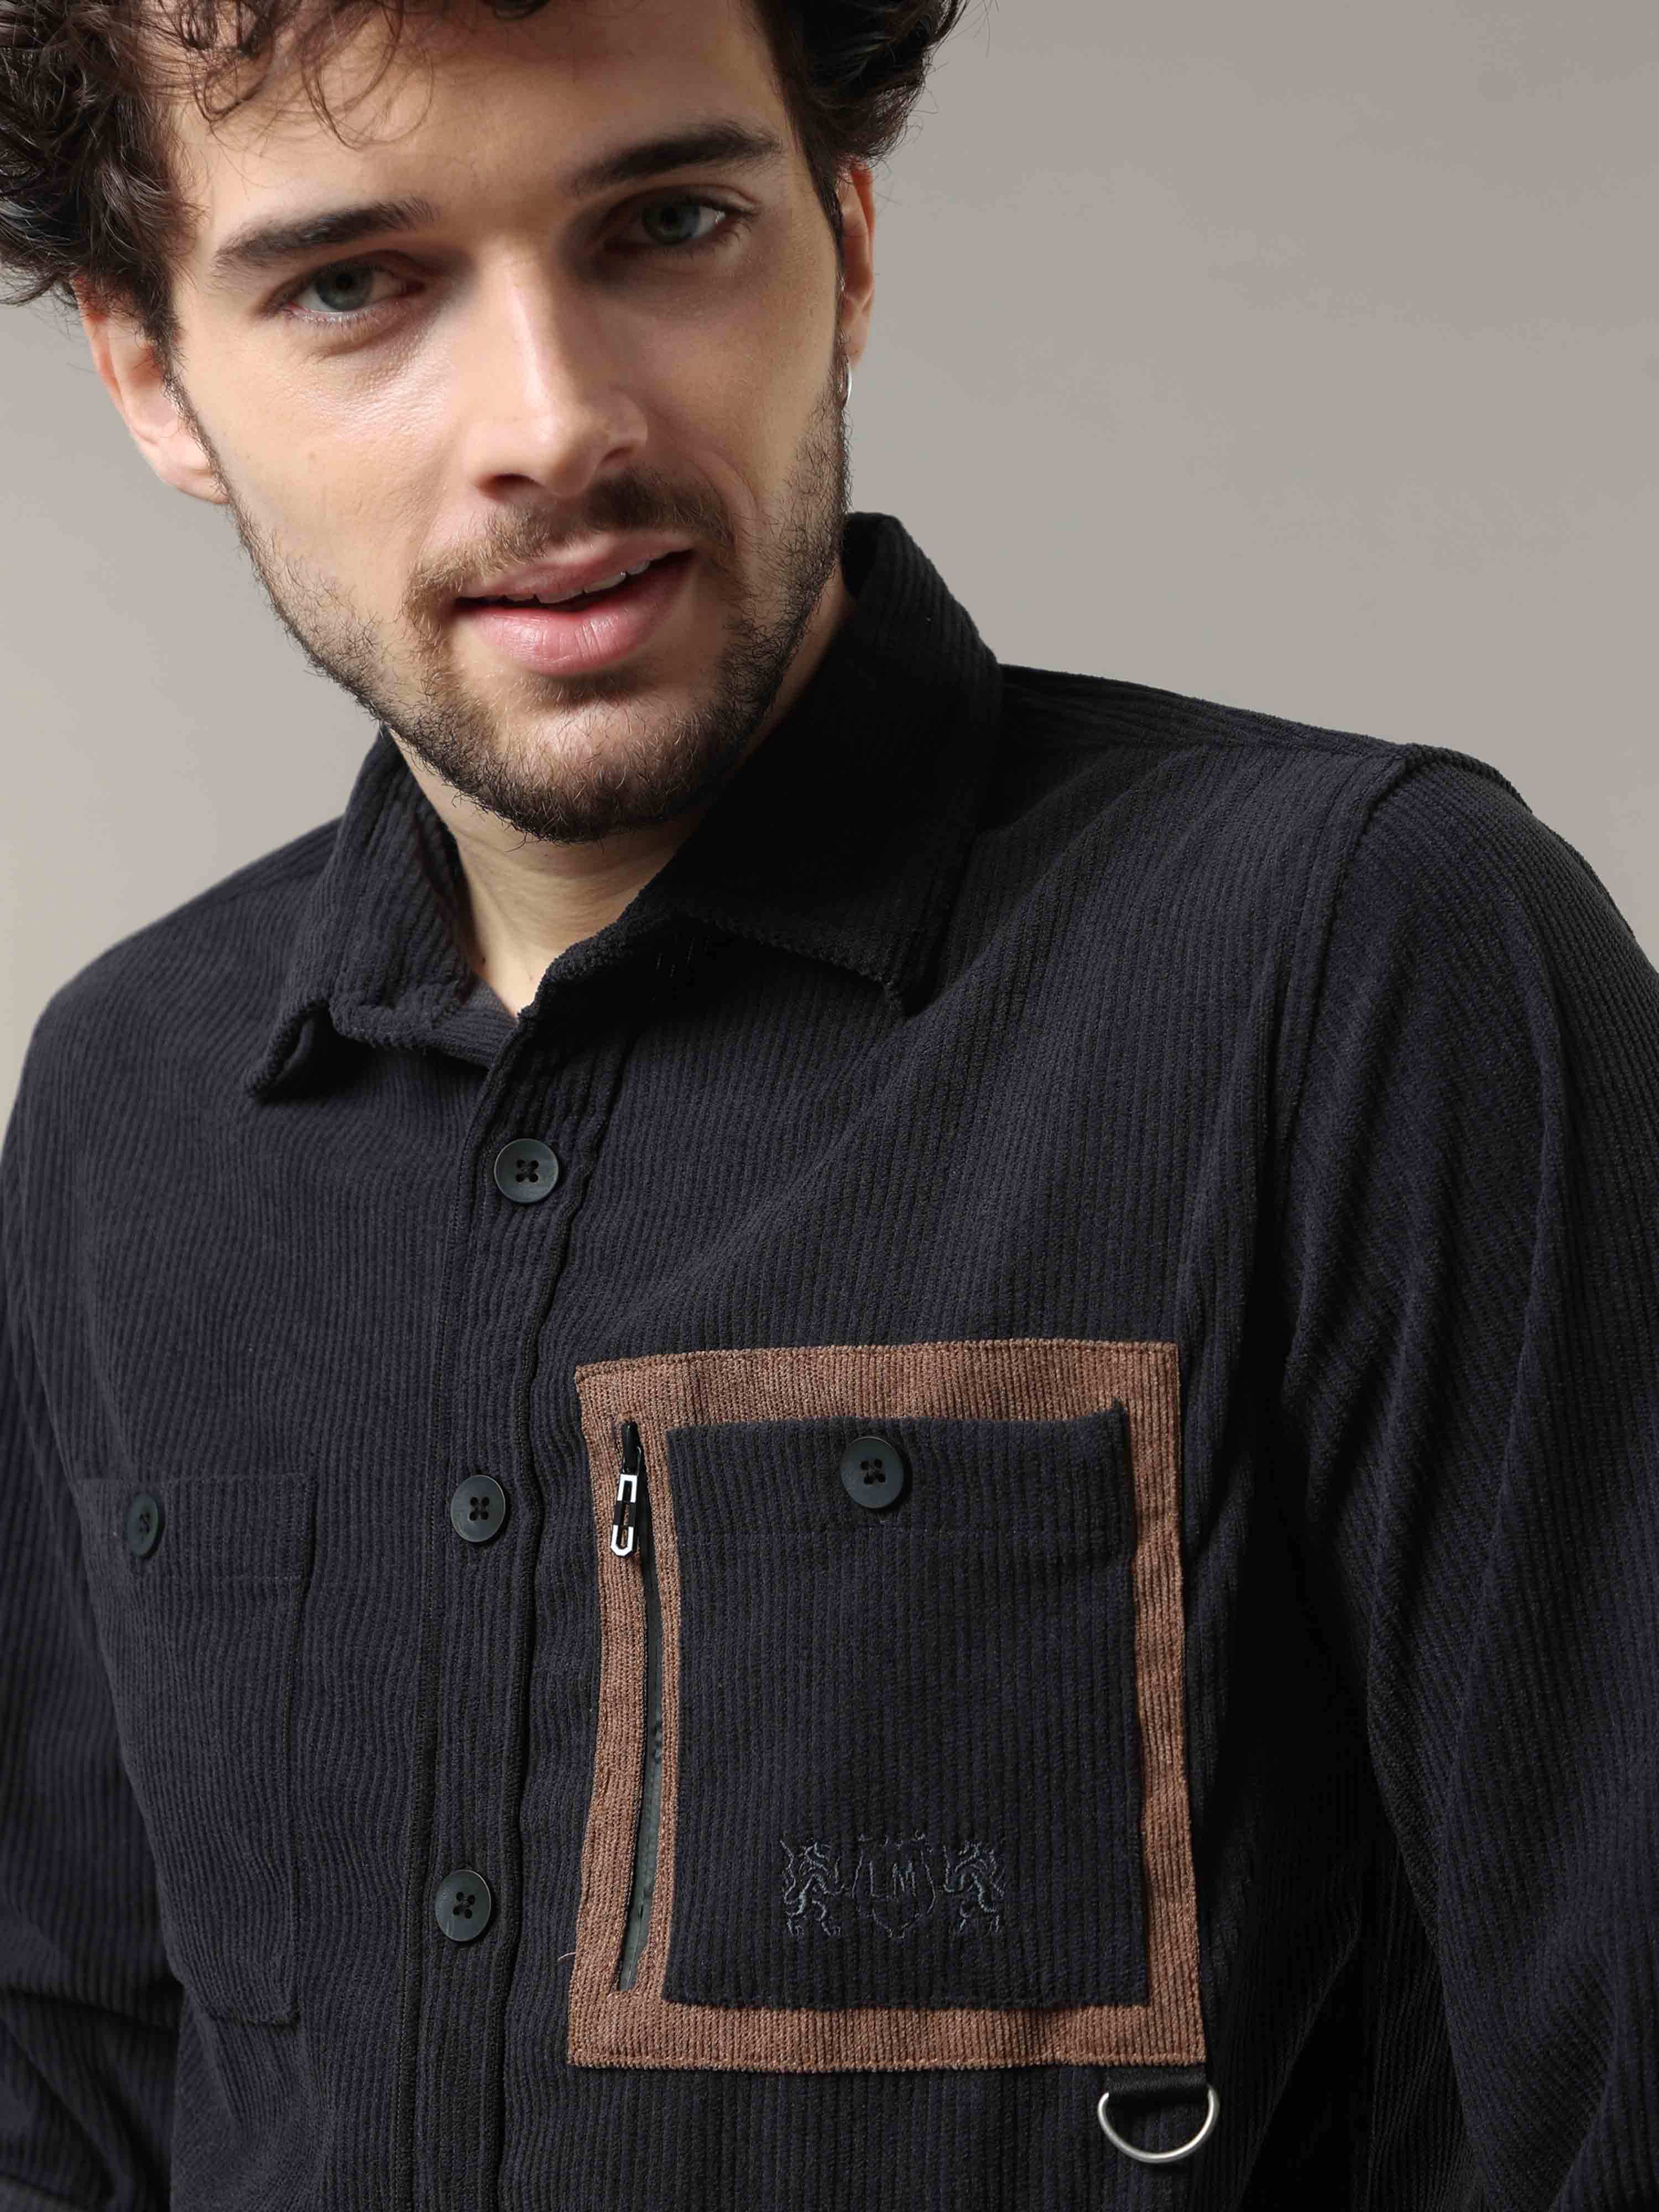 Buy Cool And Comfortable Double Pocket Mens OvershirtRs. 1499.00